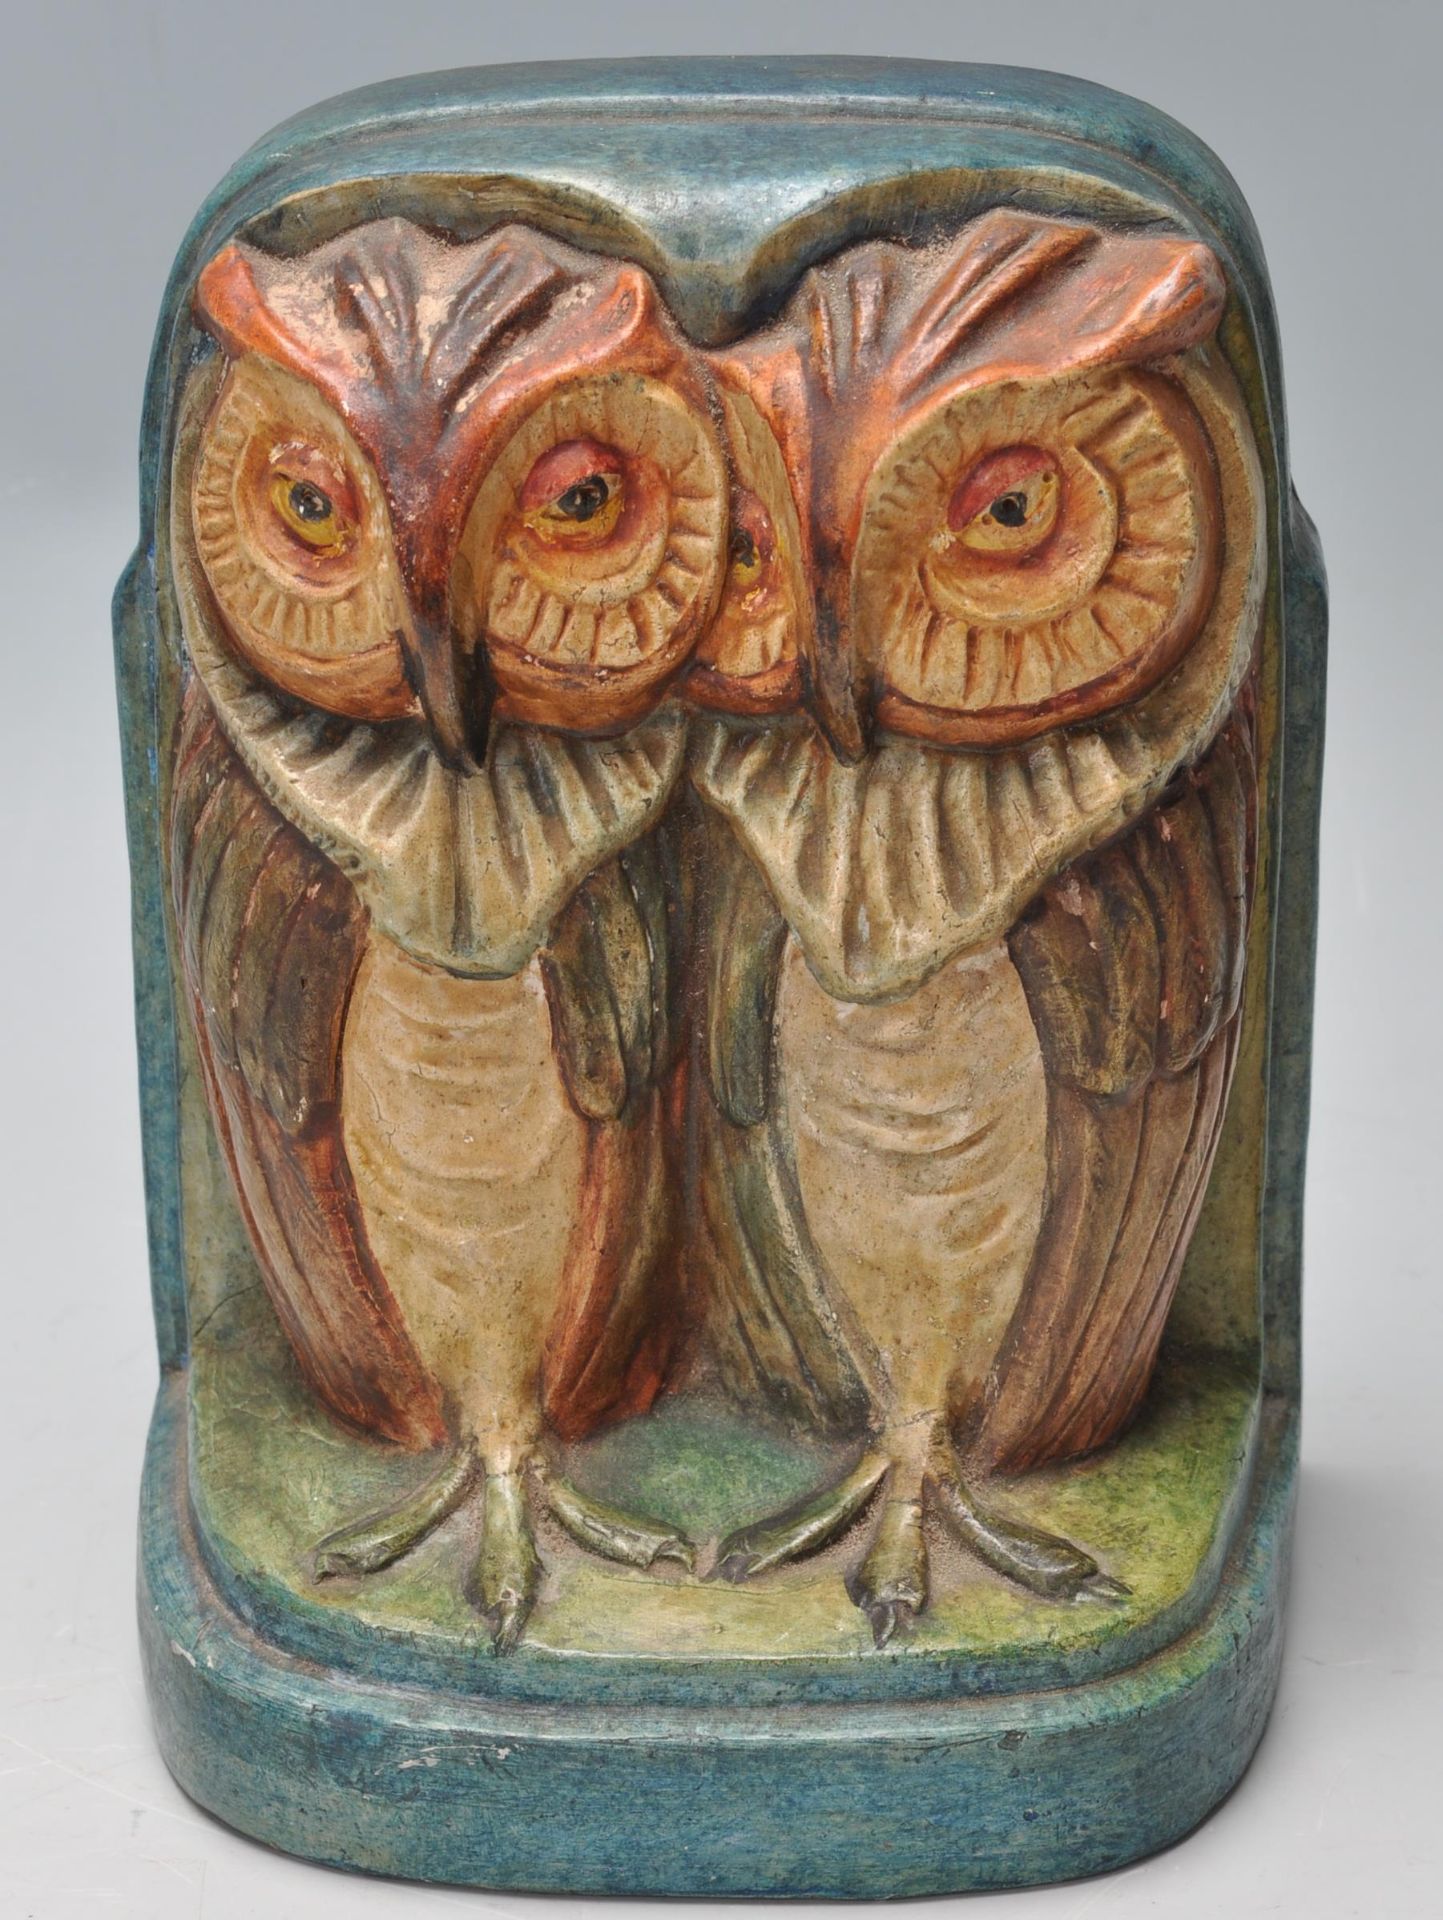 RARE EARLY 20TH CENTURY ARTS AND CRAFTS COMPTON POTTERY OWL BOOKEND